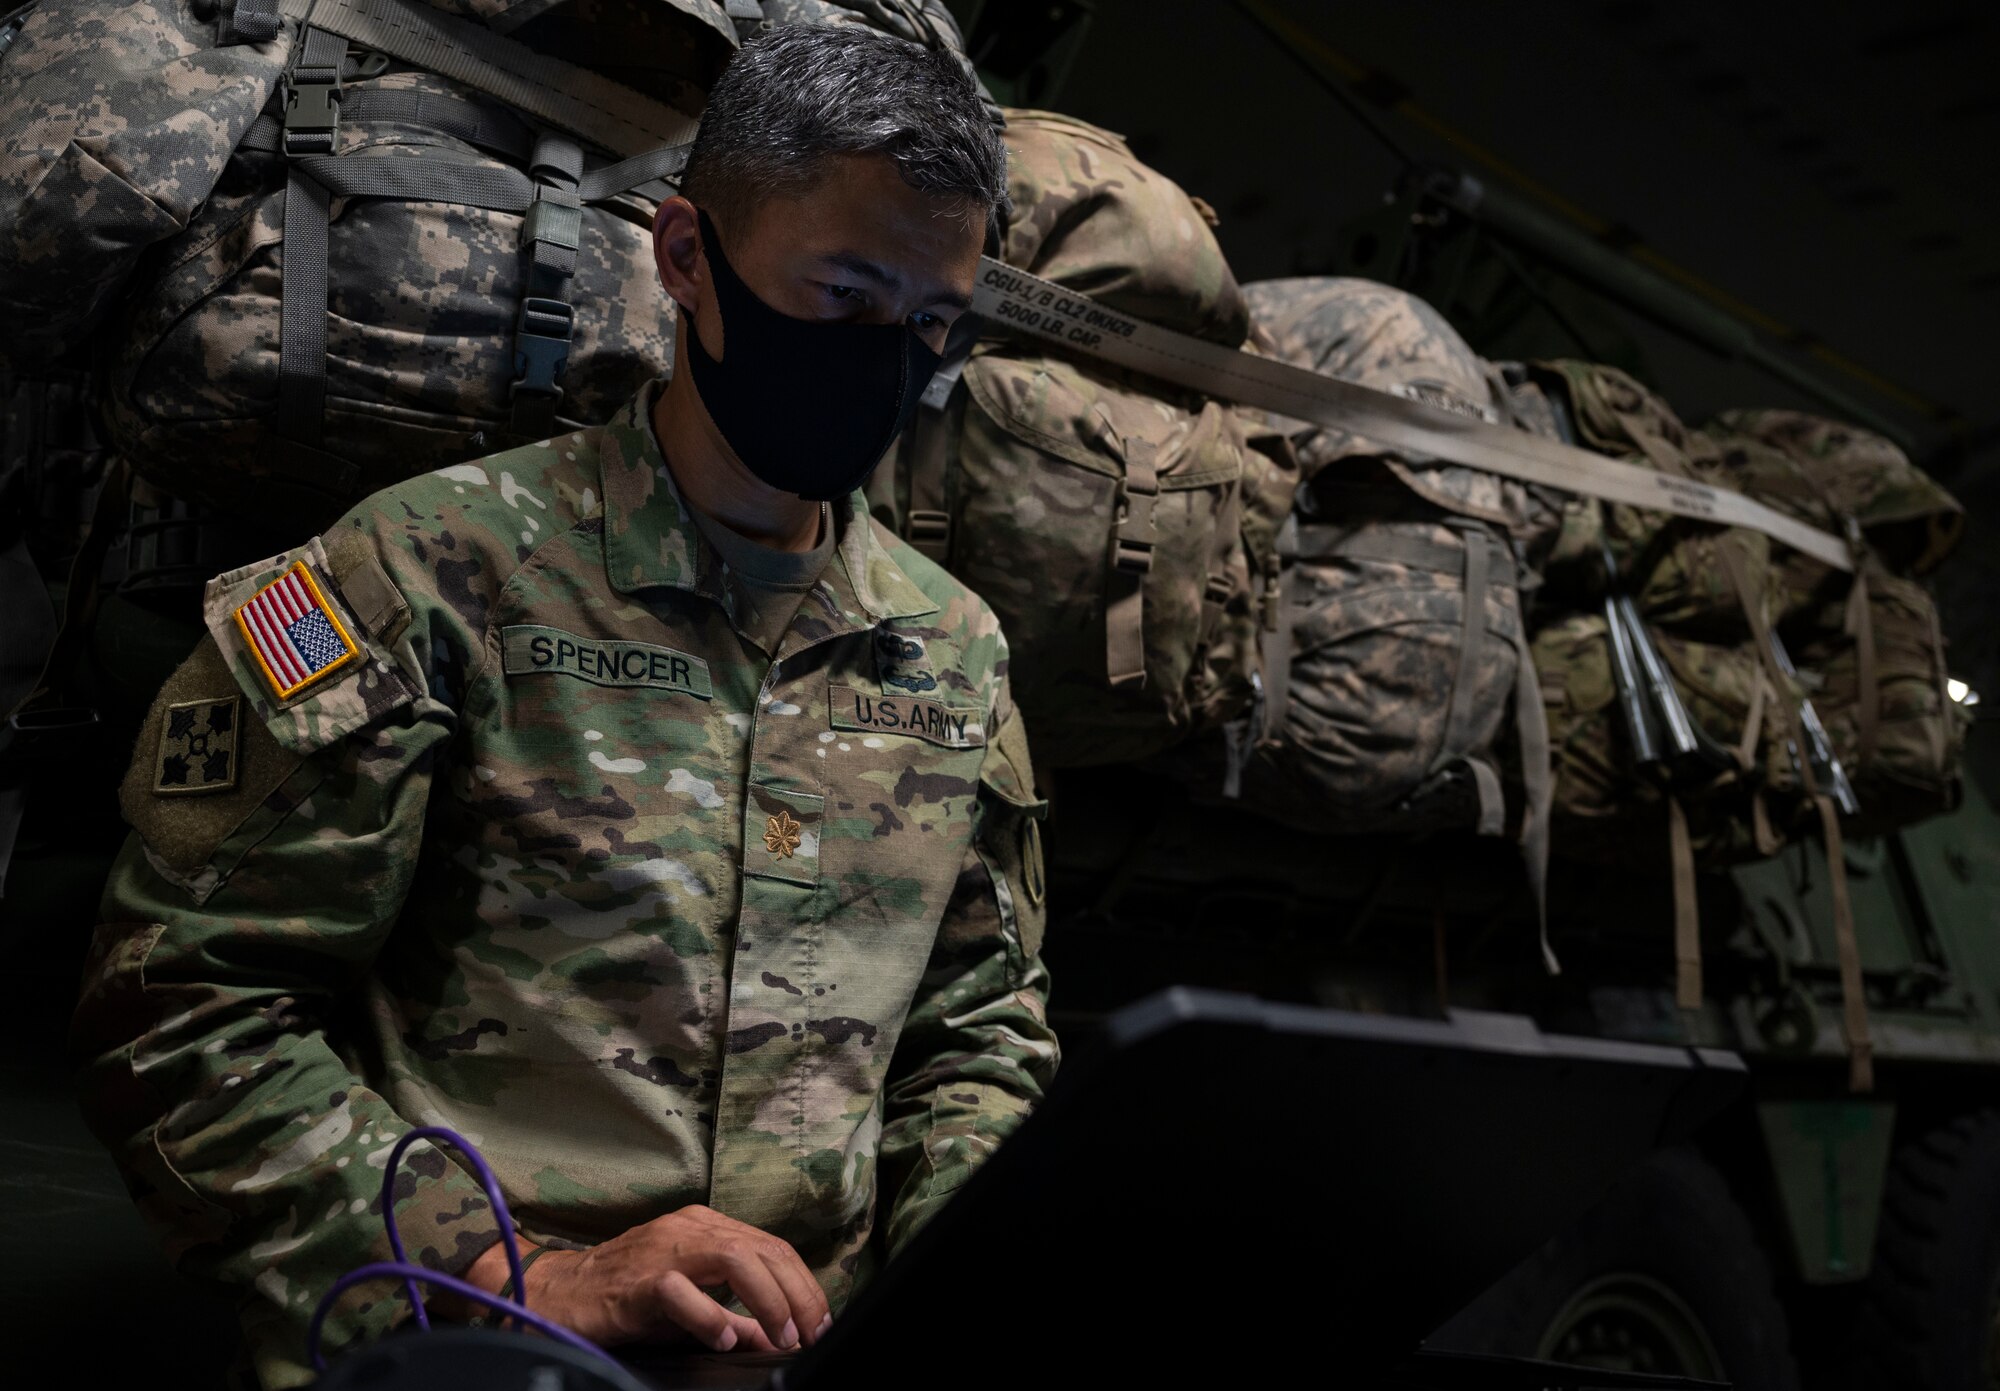 A U.S. Soldier with America’s I Corps sets up and tests a new, early entry command post concept aboard a C-17 Globemaster III while flying in the U.S. Indo-Pacific Command area of responsibility during Exercise Rainier War 21B Nov. 9, 2021. I Corps deployment and redeployment efforts from Andersen Air Force Base, Guam, included ensuring uninterrupted communication capabilities, even while in flight, aboard a C-17 Globemaster III. Rainier War 21B exercised and evaluated the 62nd Airlift Wing’s ability to employ the force and their ability to perform during wartime and contingency taskings in a high-intensity, wartime contested, degraded and operationally limited environment while supporting the contingency operations against a near-peer adversary in the U.S. Indo-Pacific Command area of responsibility. (U.S. Air Force photo by Staff Sgt. Rachel Williams)